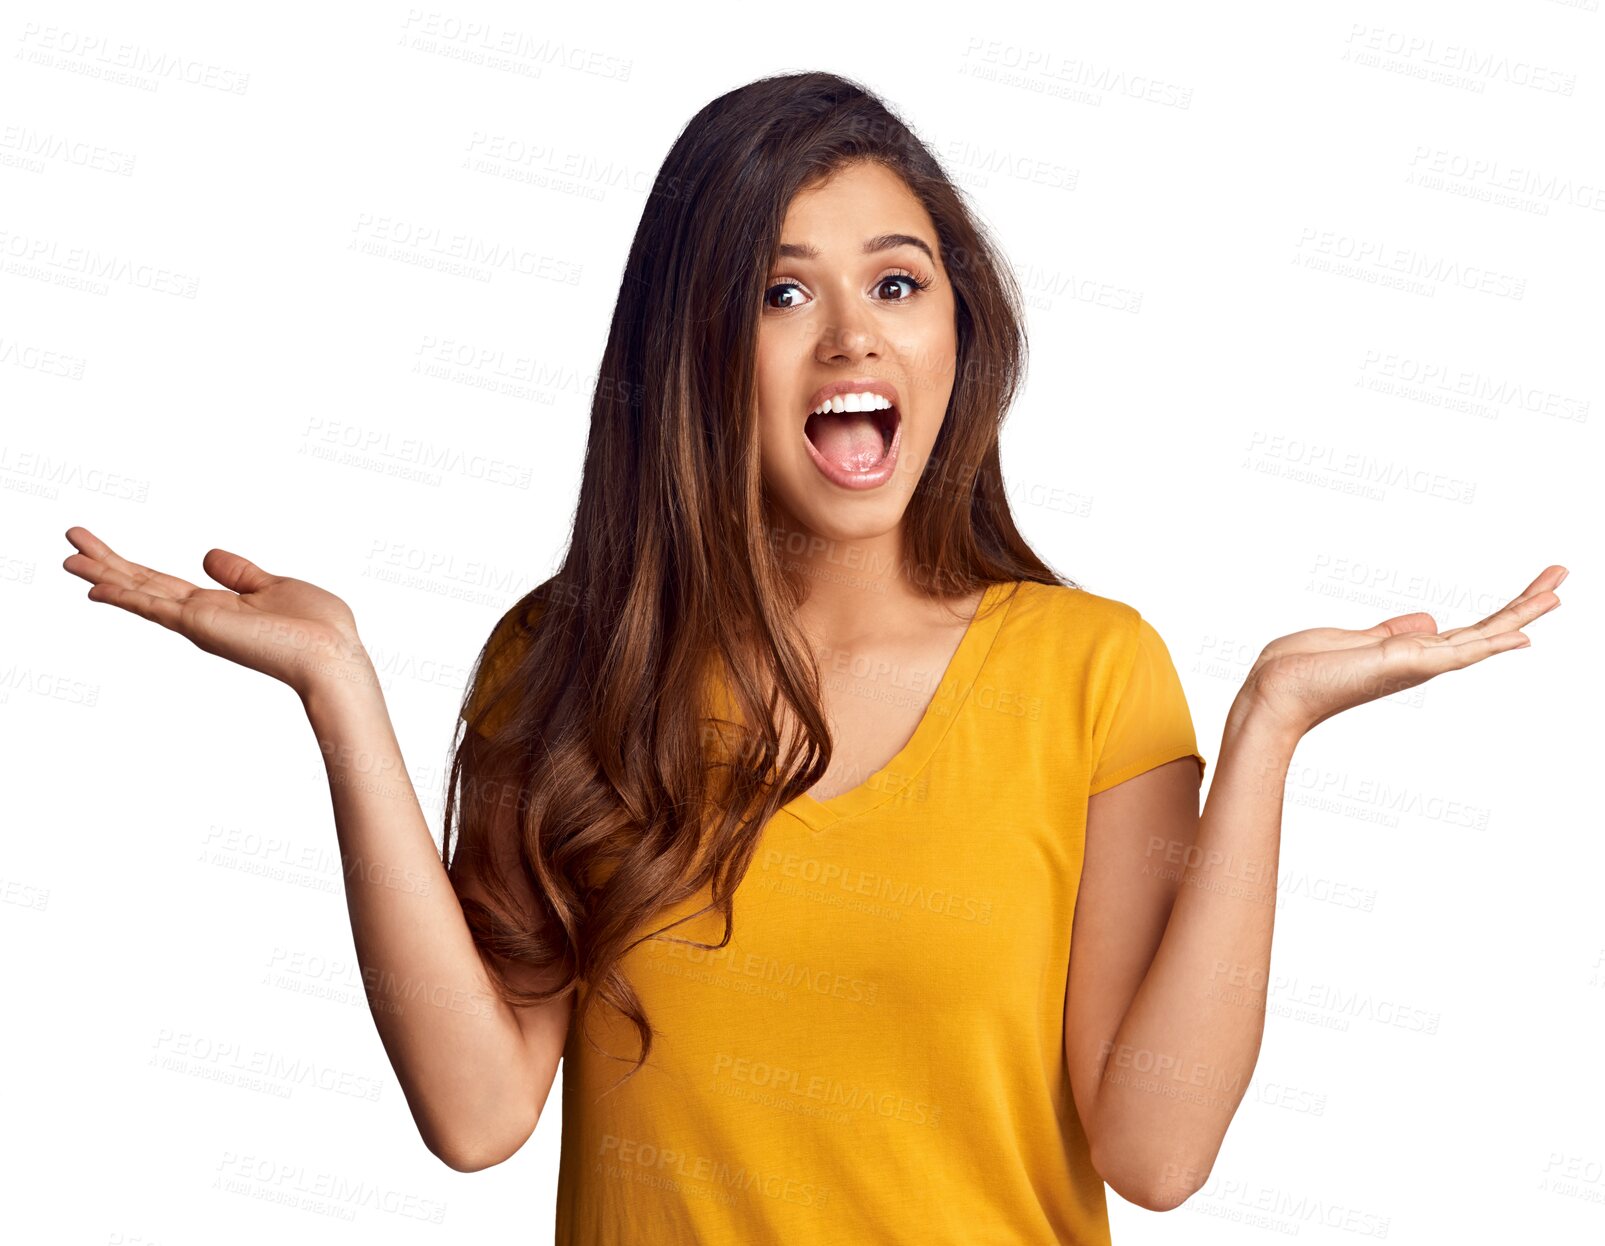 Buy stock photo Portrait, happy woman and smile with presentation for option, offer or decision with suggestion for choice. Female model, excited emoji or facial expression on isolated or transparent png background